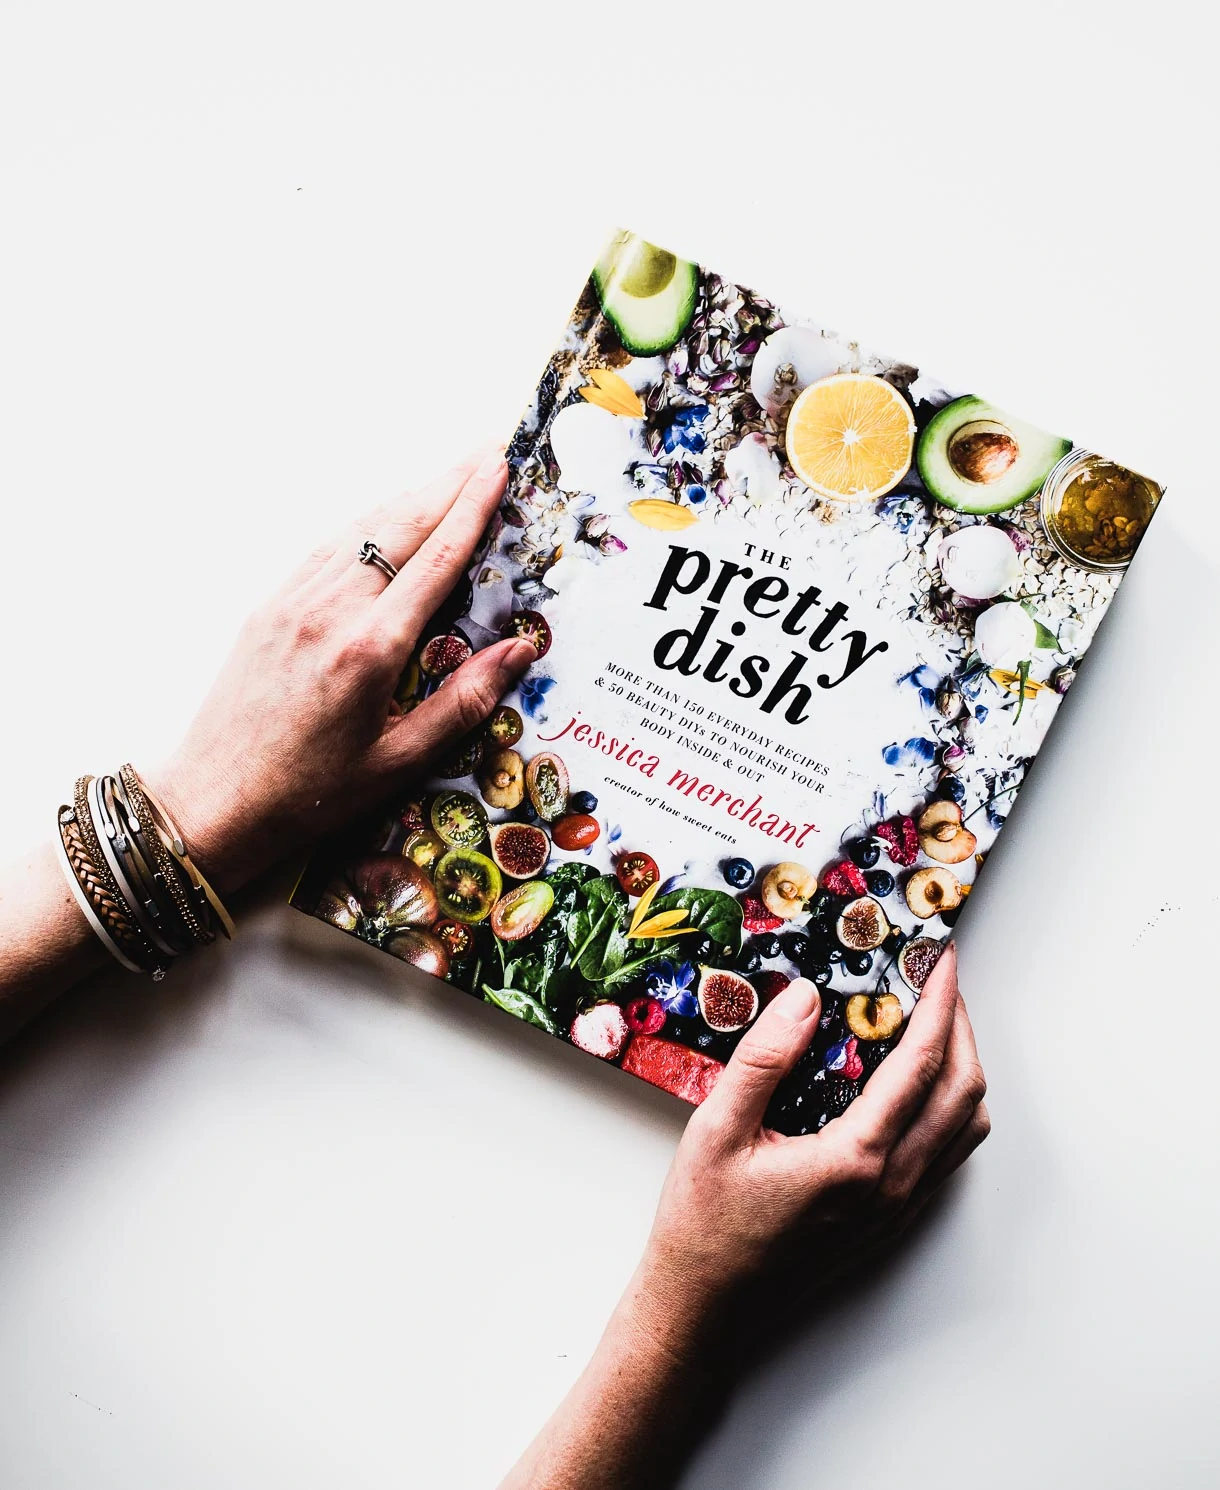 cookbook club review: The Pretty Dish by Jessica Merchant